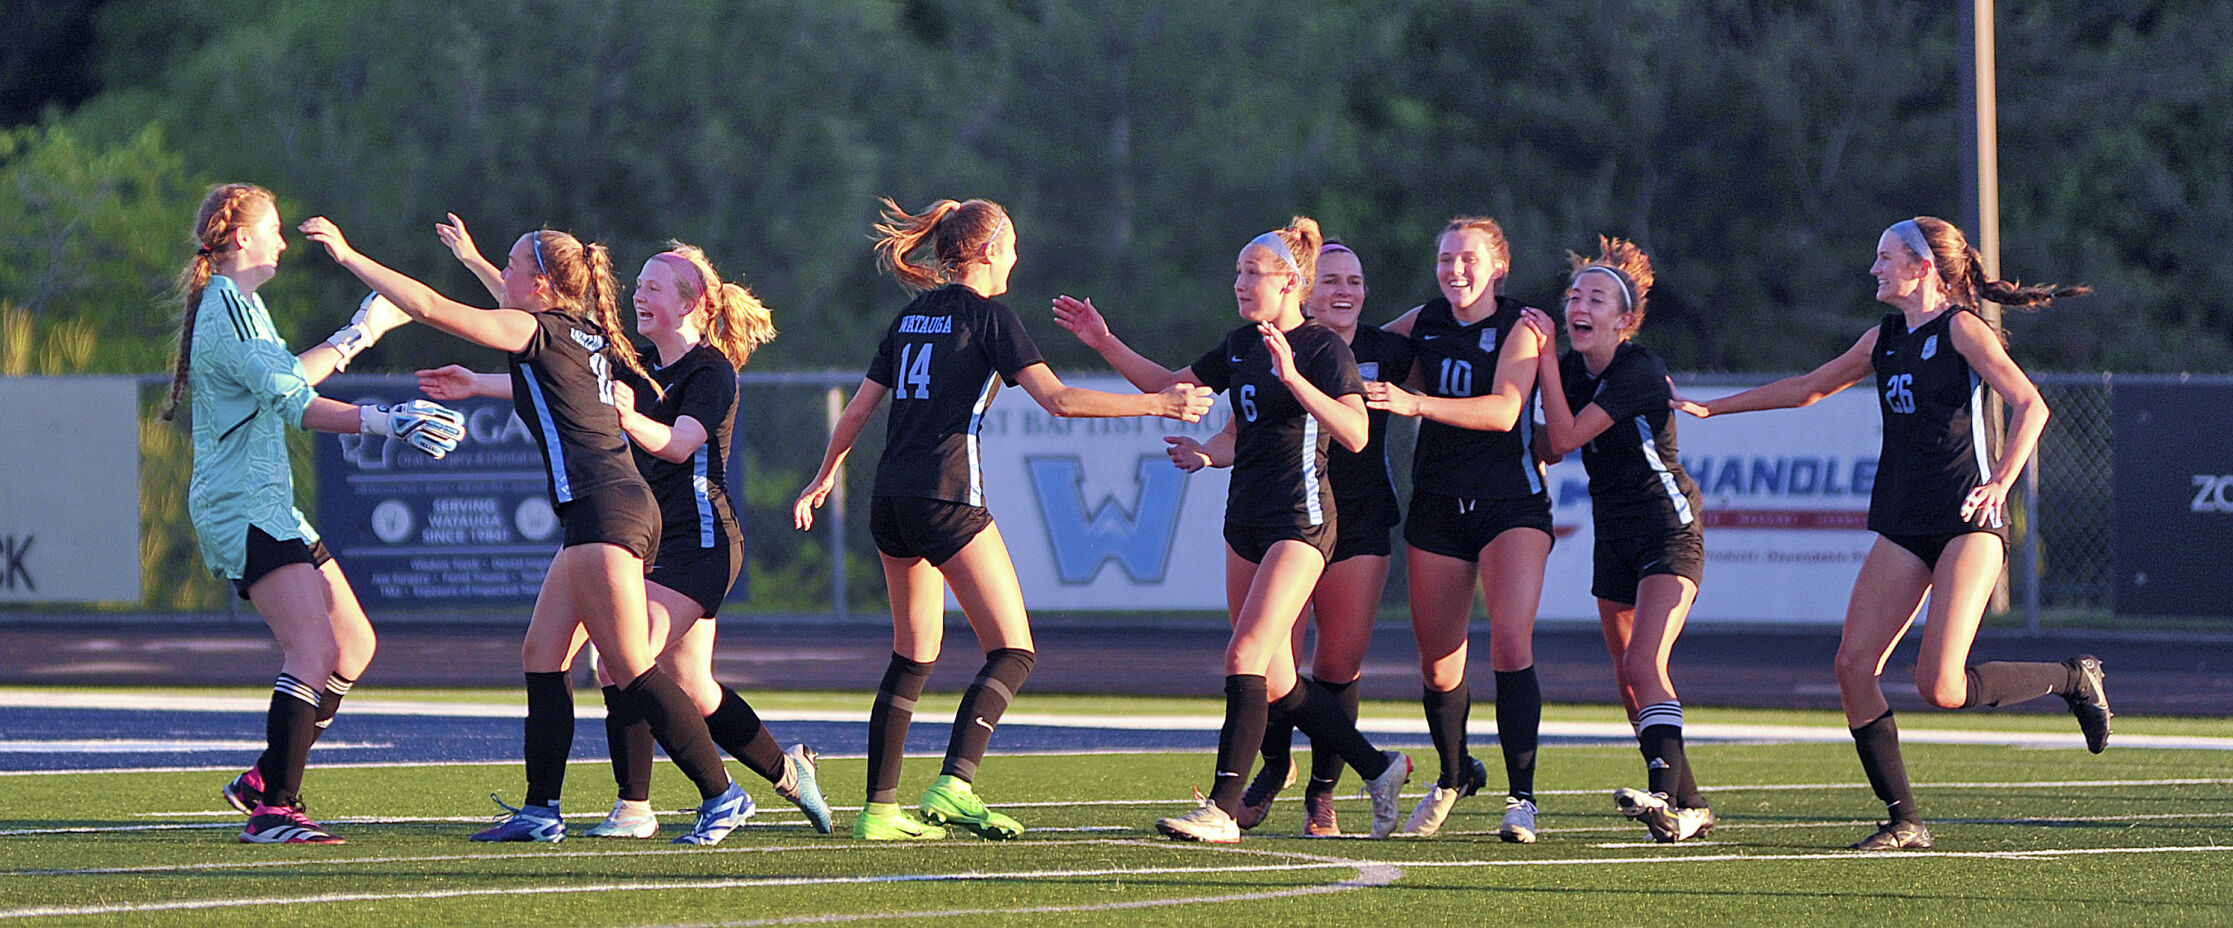 Defense stands tall, boosts Watauga soccer into third round